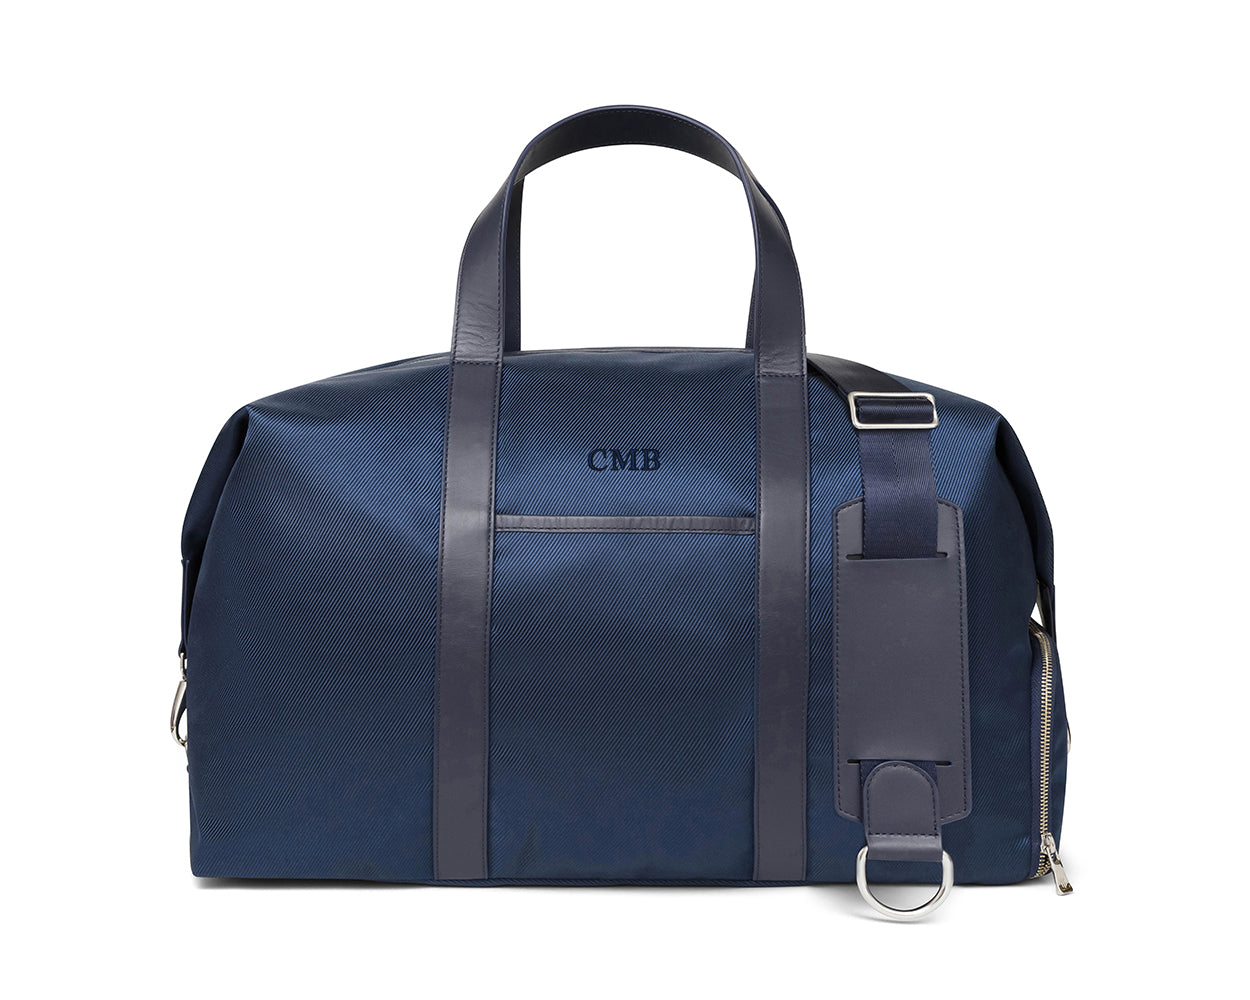 Navy embroidered travel bag with dark adjustable leather strap and embroidered lettering from Holderness and Bourne.